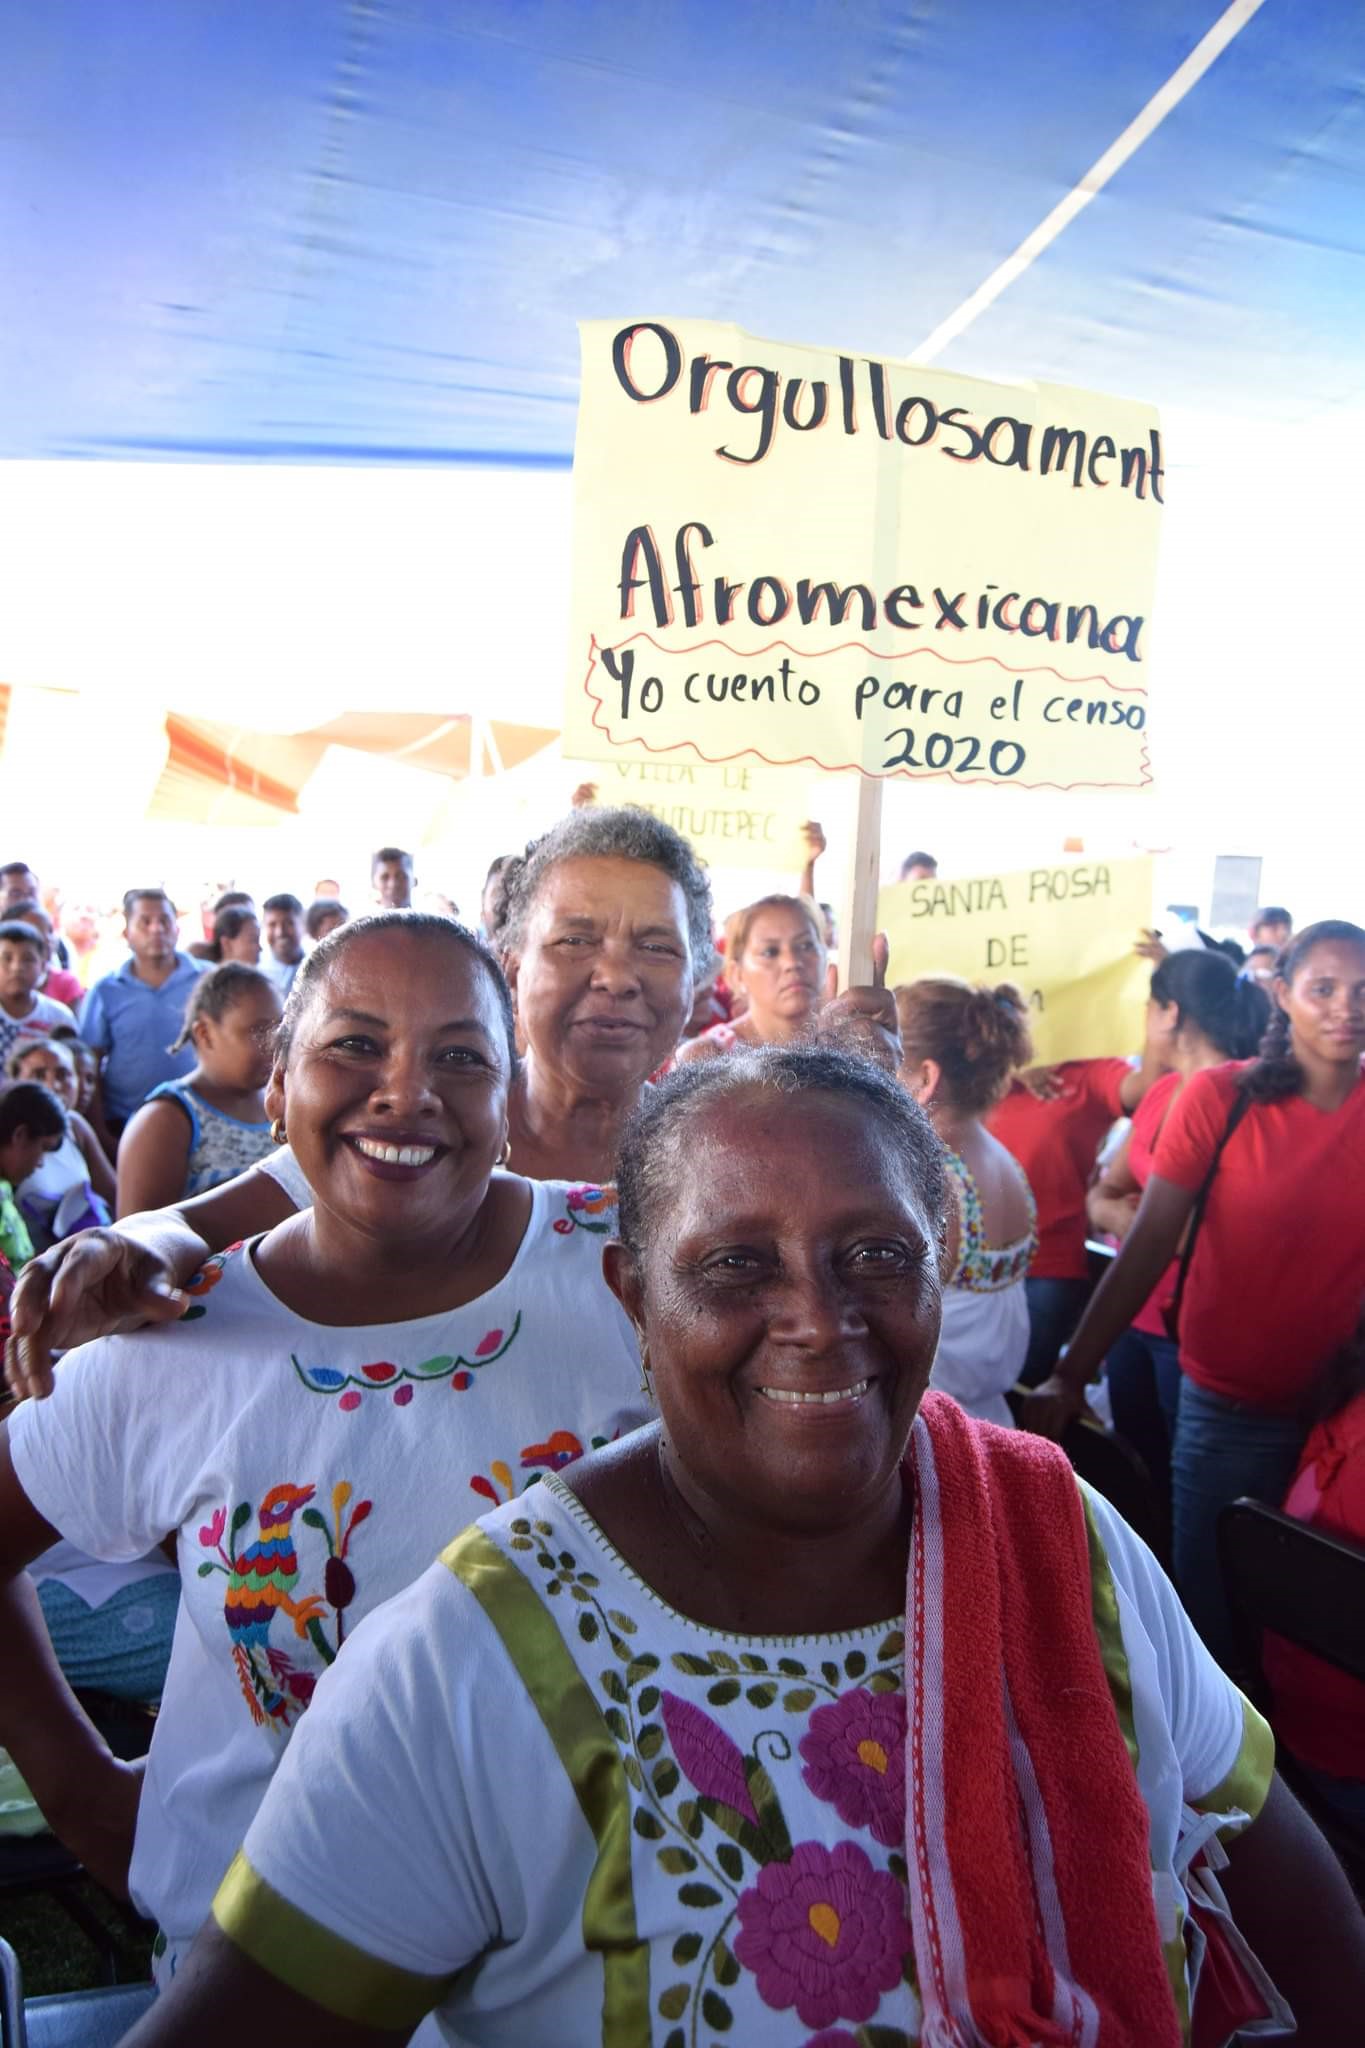 Image of Afro Mexicans with 2020 Mexican census sign